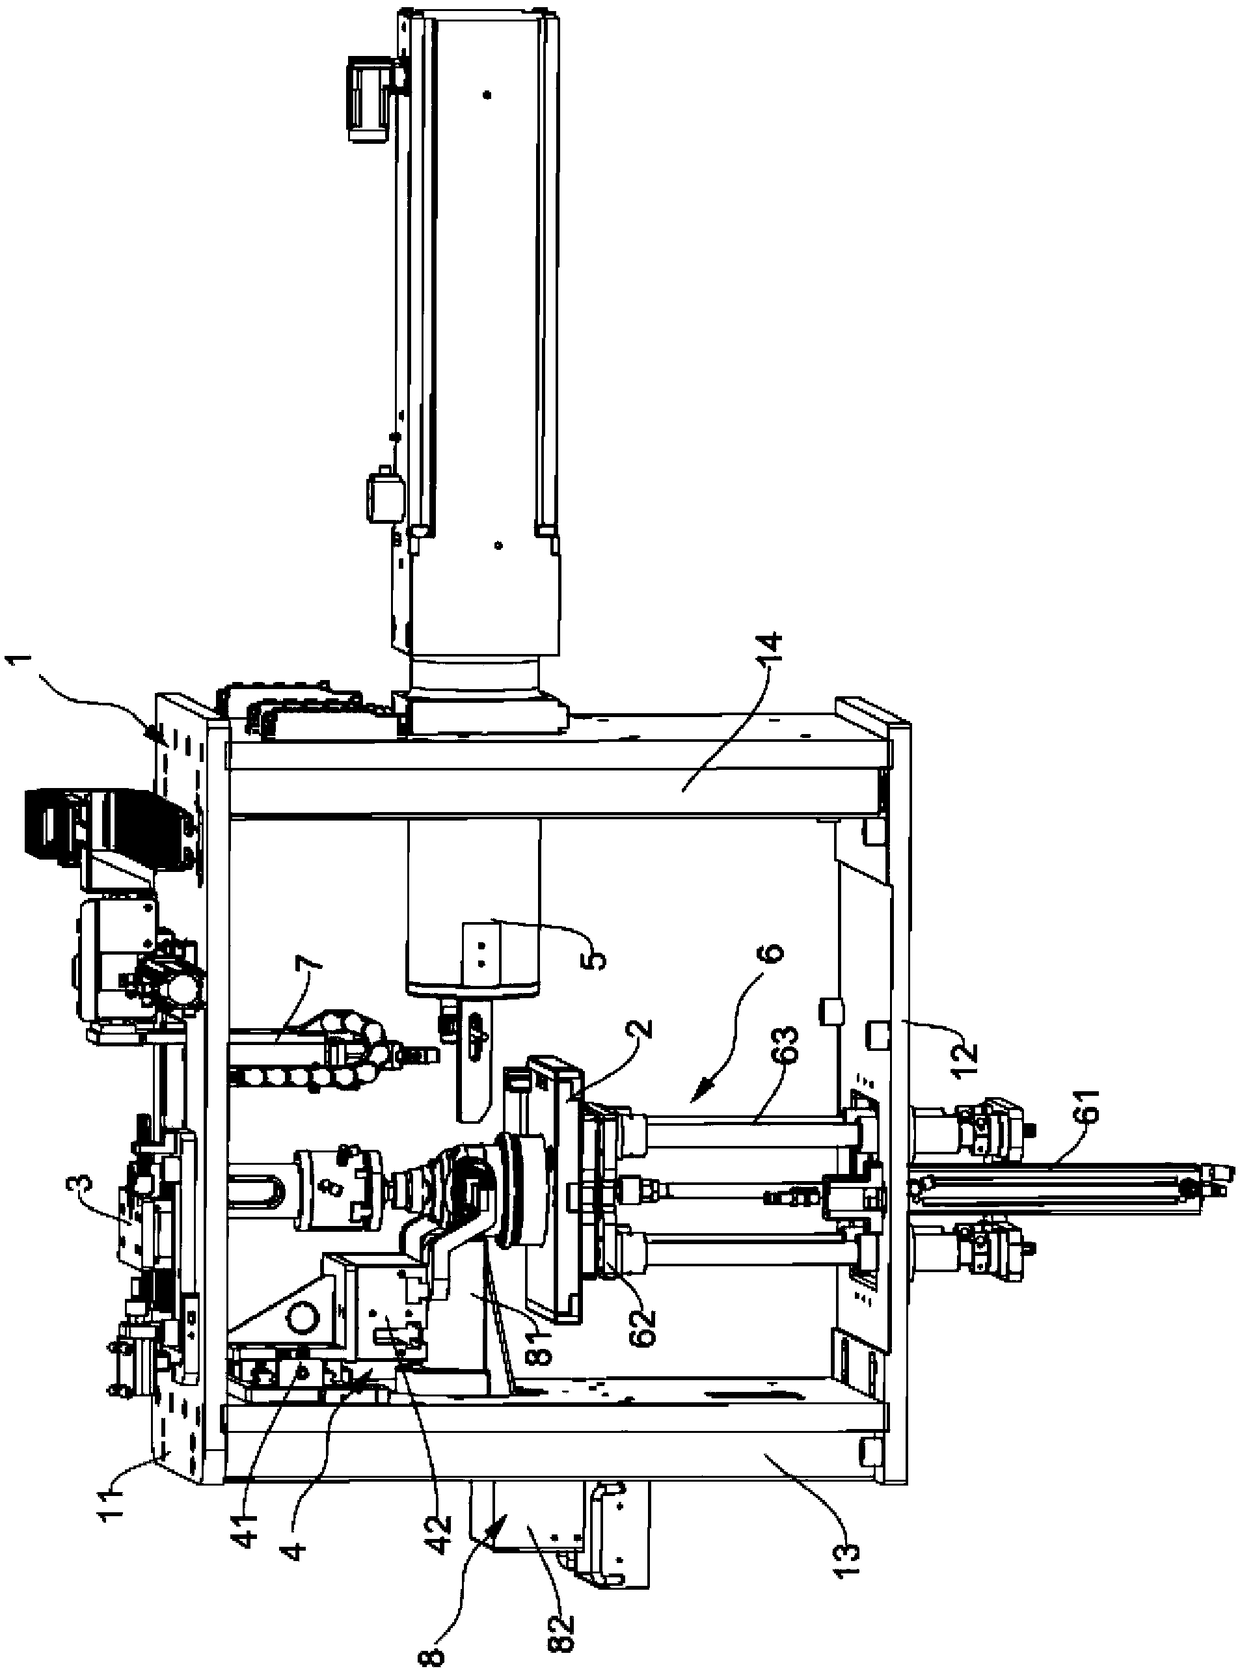 Pin shaft assembly equipment